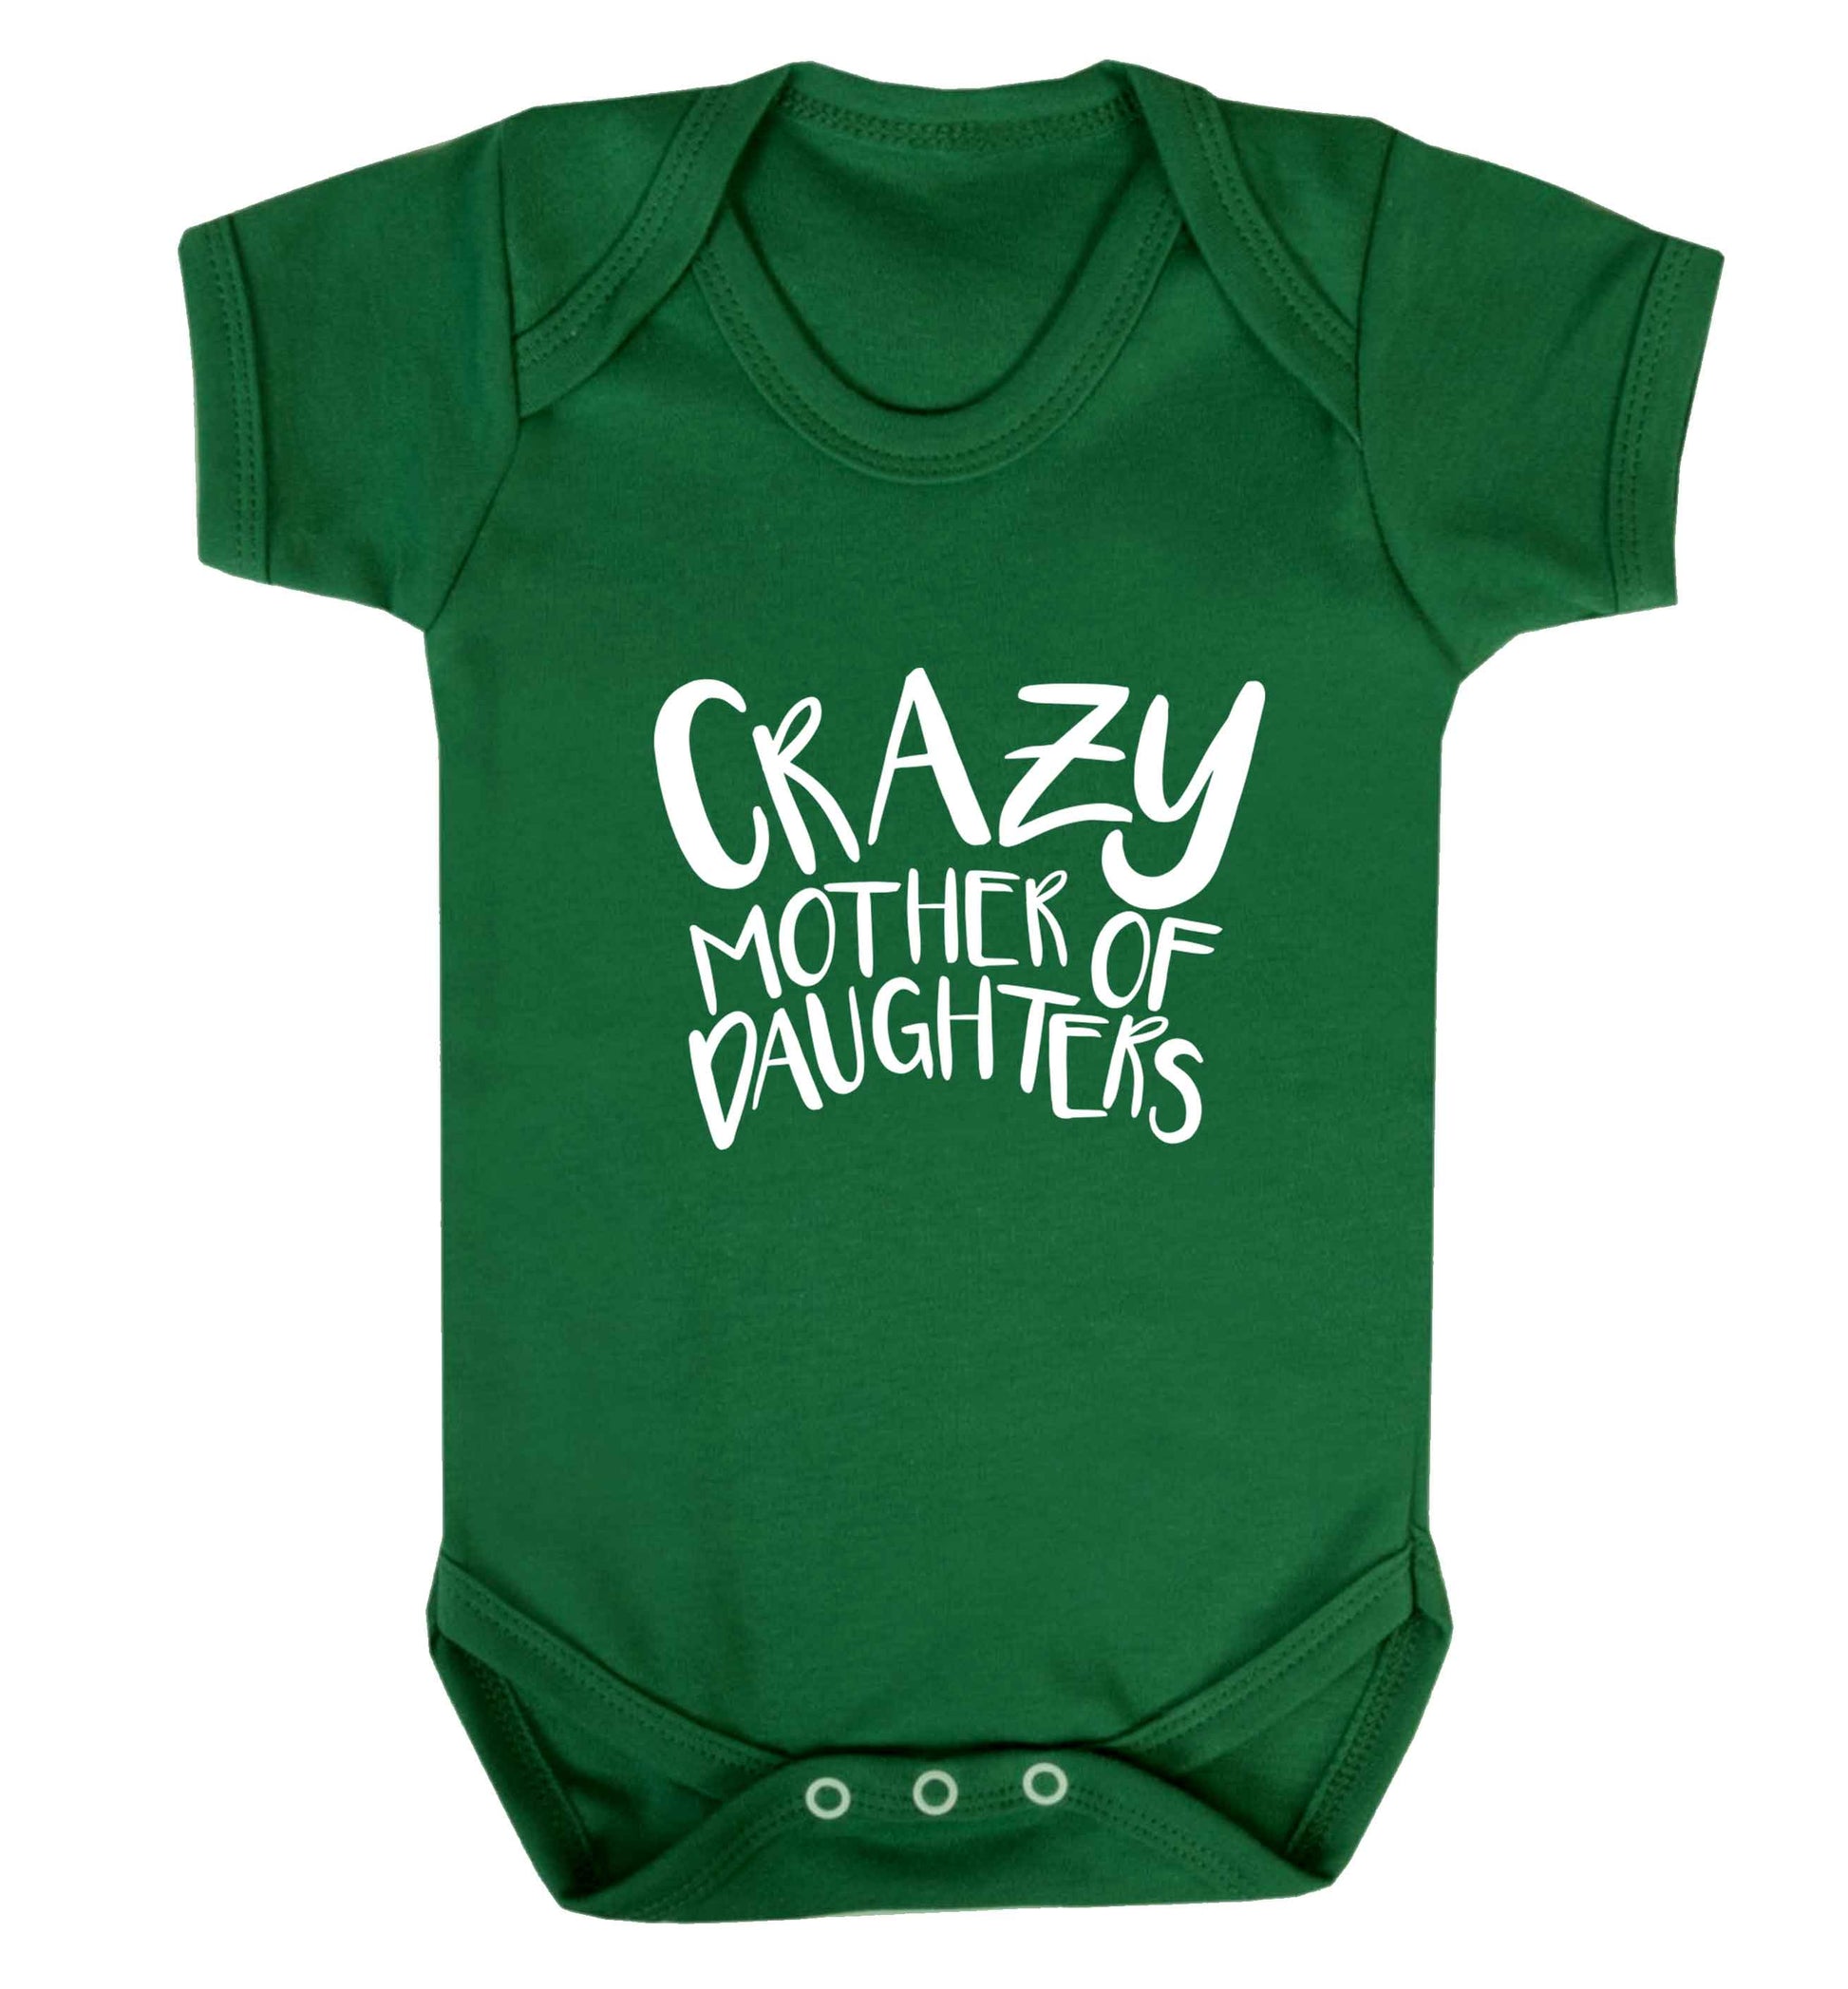 Crazy mother of daughters baby vest green 18-24 months